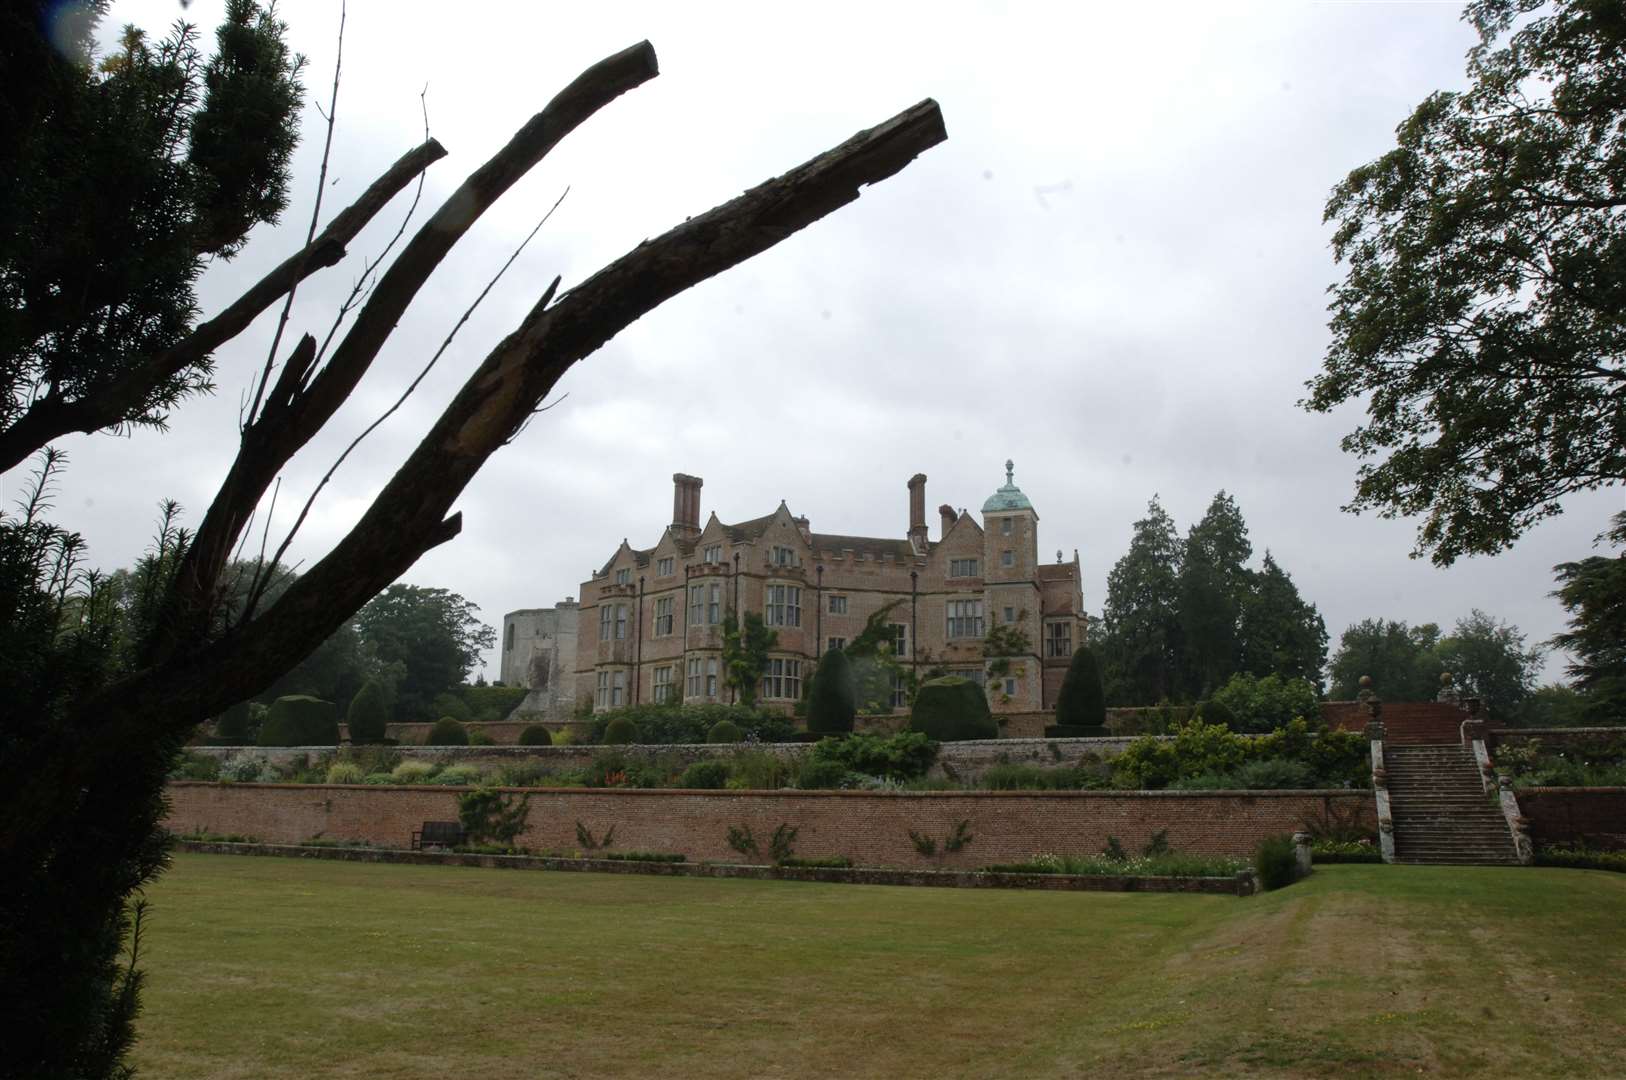 Chilham Castle hosted the reception for Mr Motivator's big day in 1996